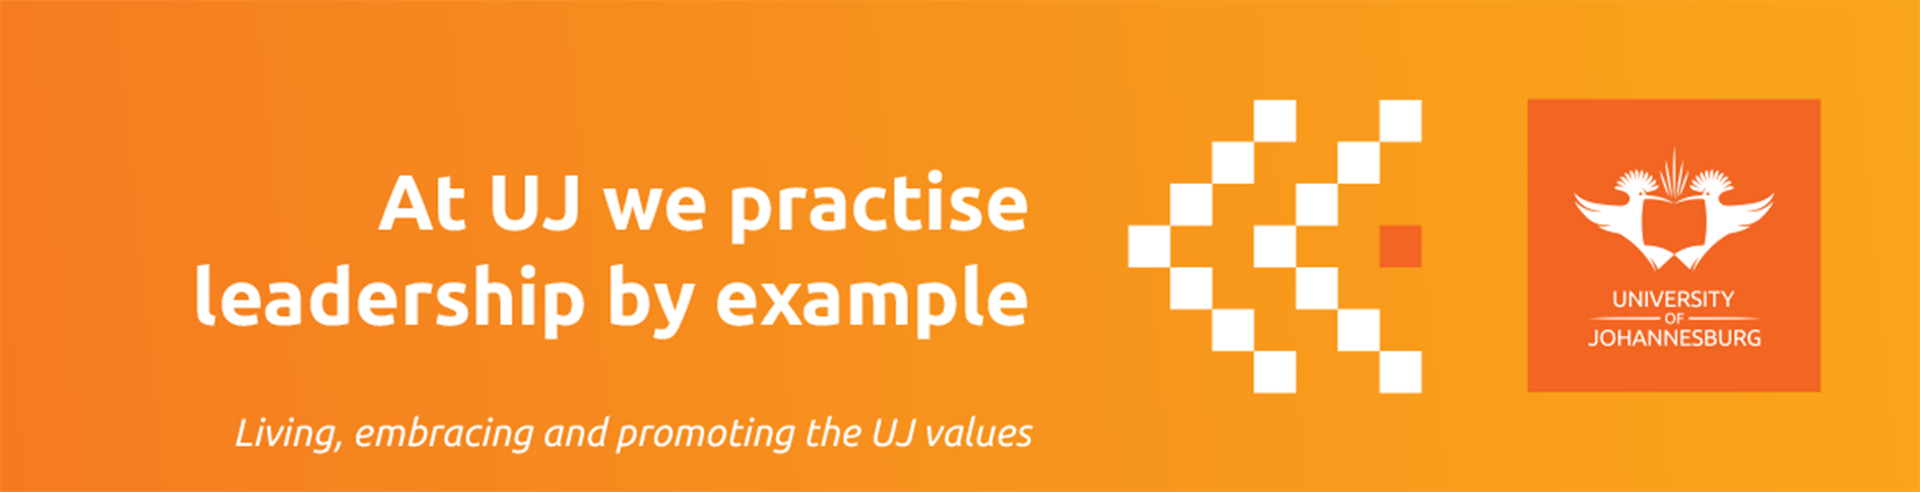 Uj Values Expressions Posters 2020 Ulink 1170x300mm 12